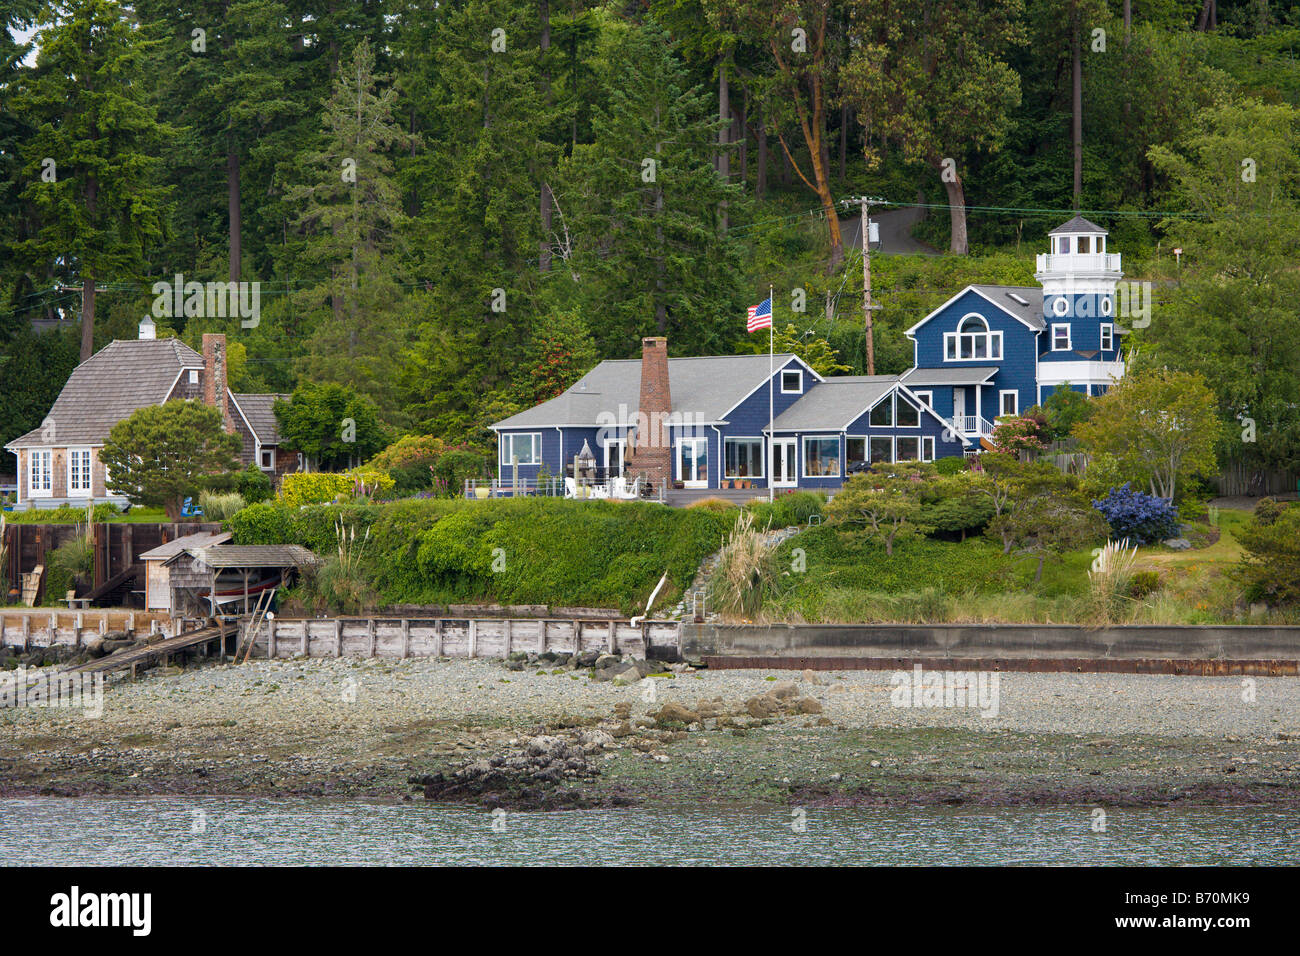 Residential homes along coastline of island in Puget Sound near Seattle Washington Stock Photo